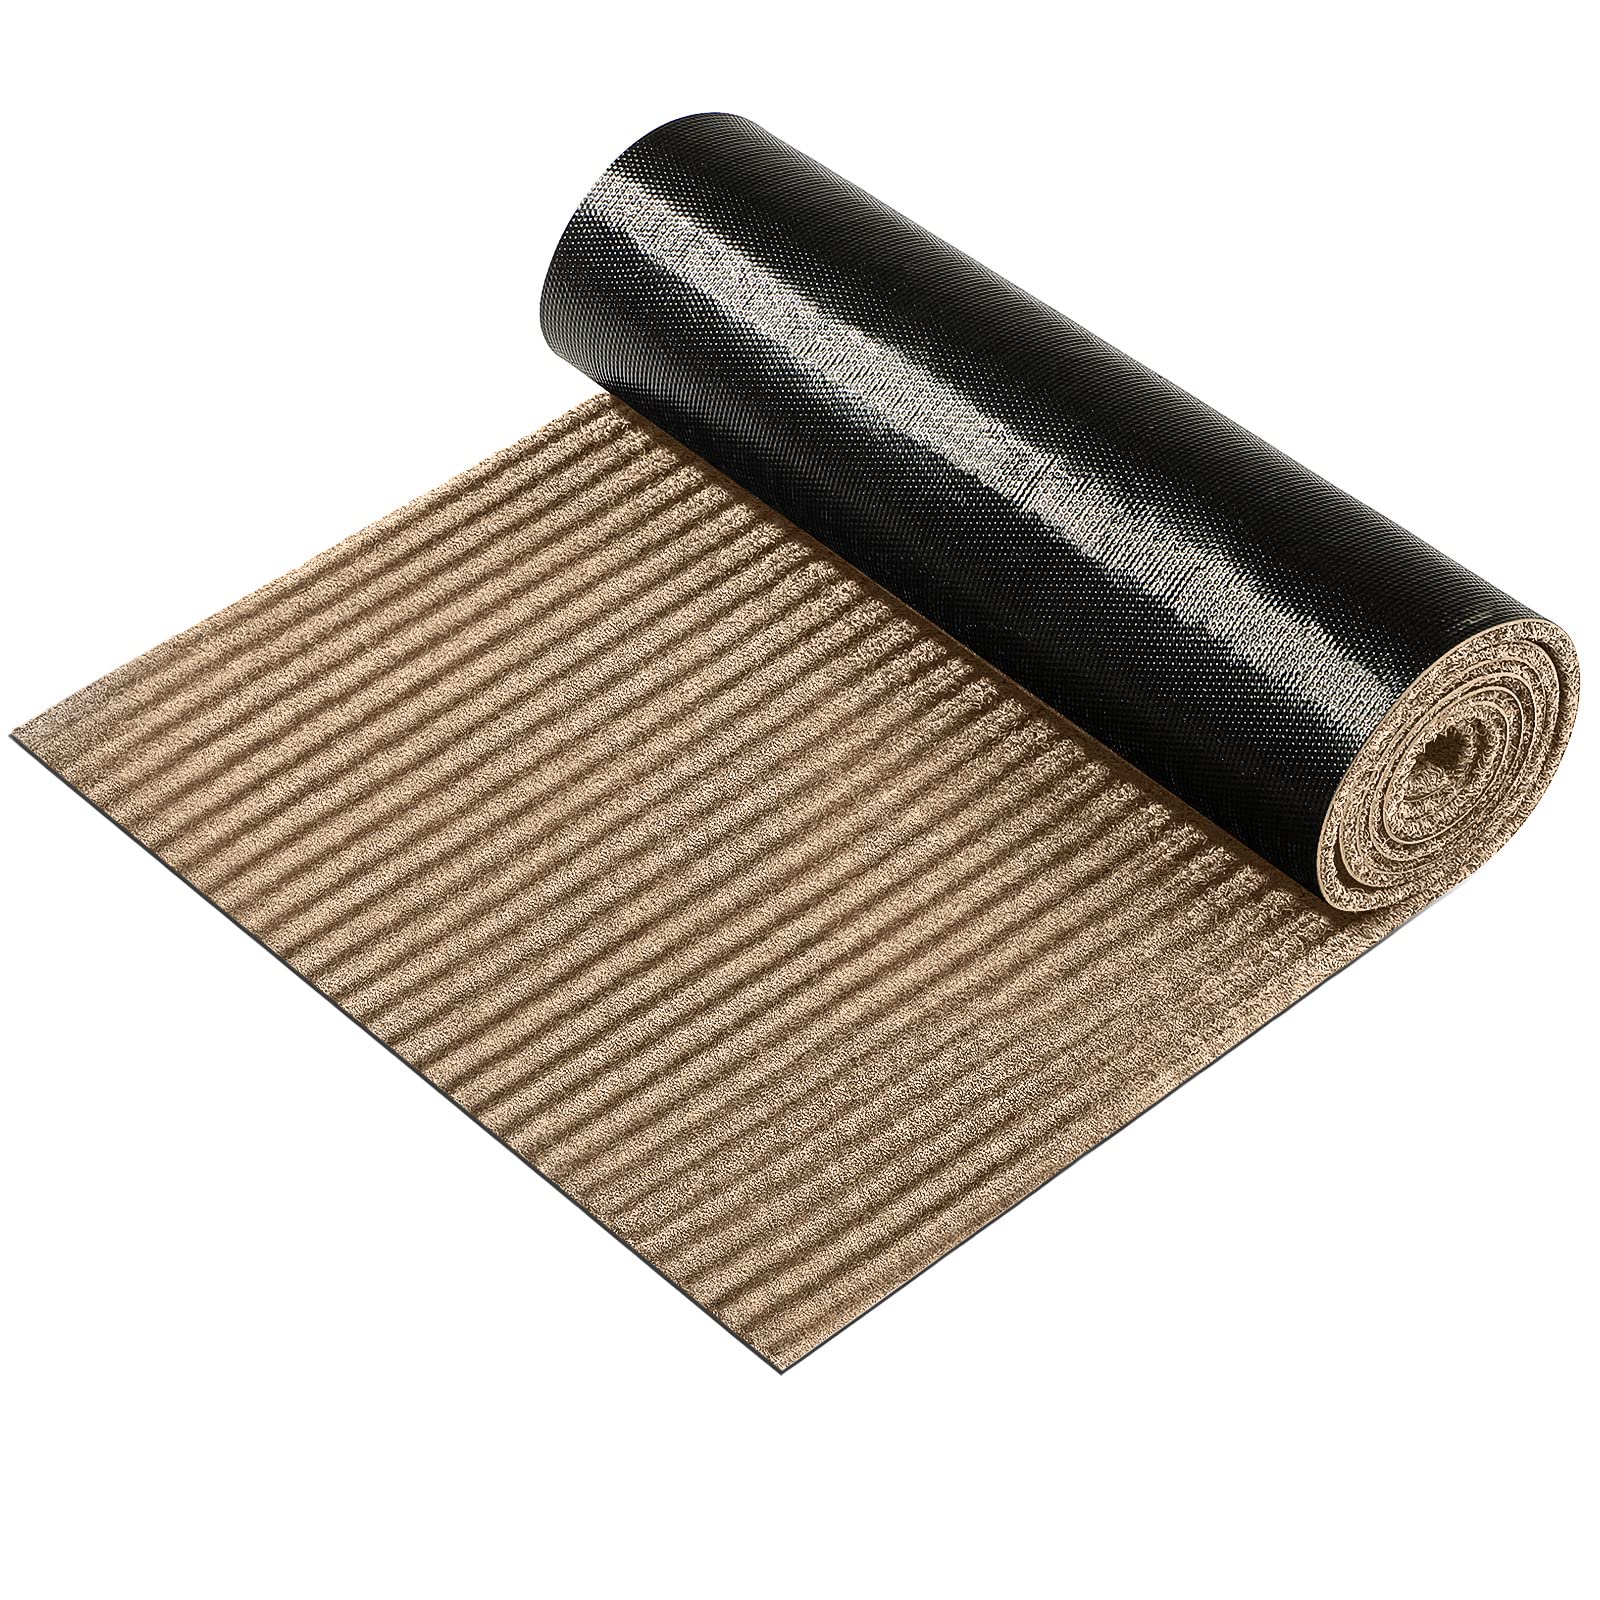 Nuanchu A Roll Large Semi-Finished Striped Door Mat Waterproof Entry Mat with Rubber Lining Indoor and Outdoor Rug for Wet W